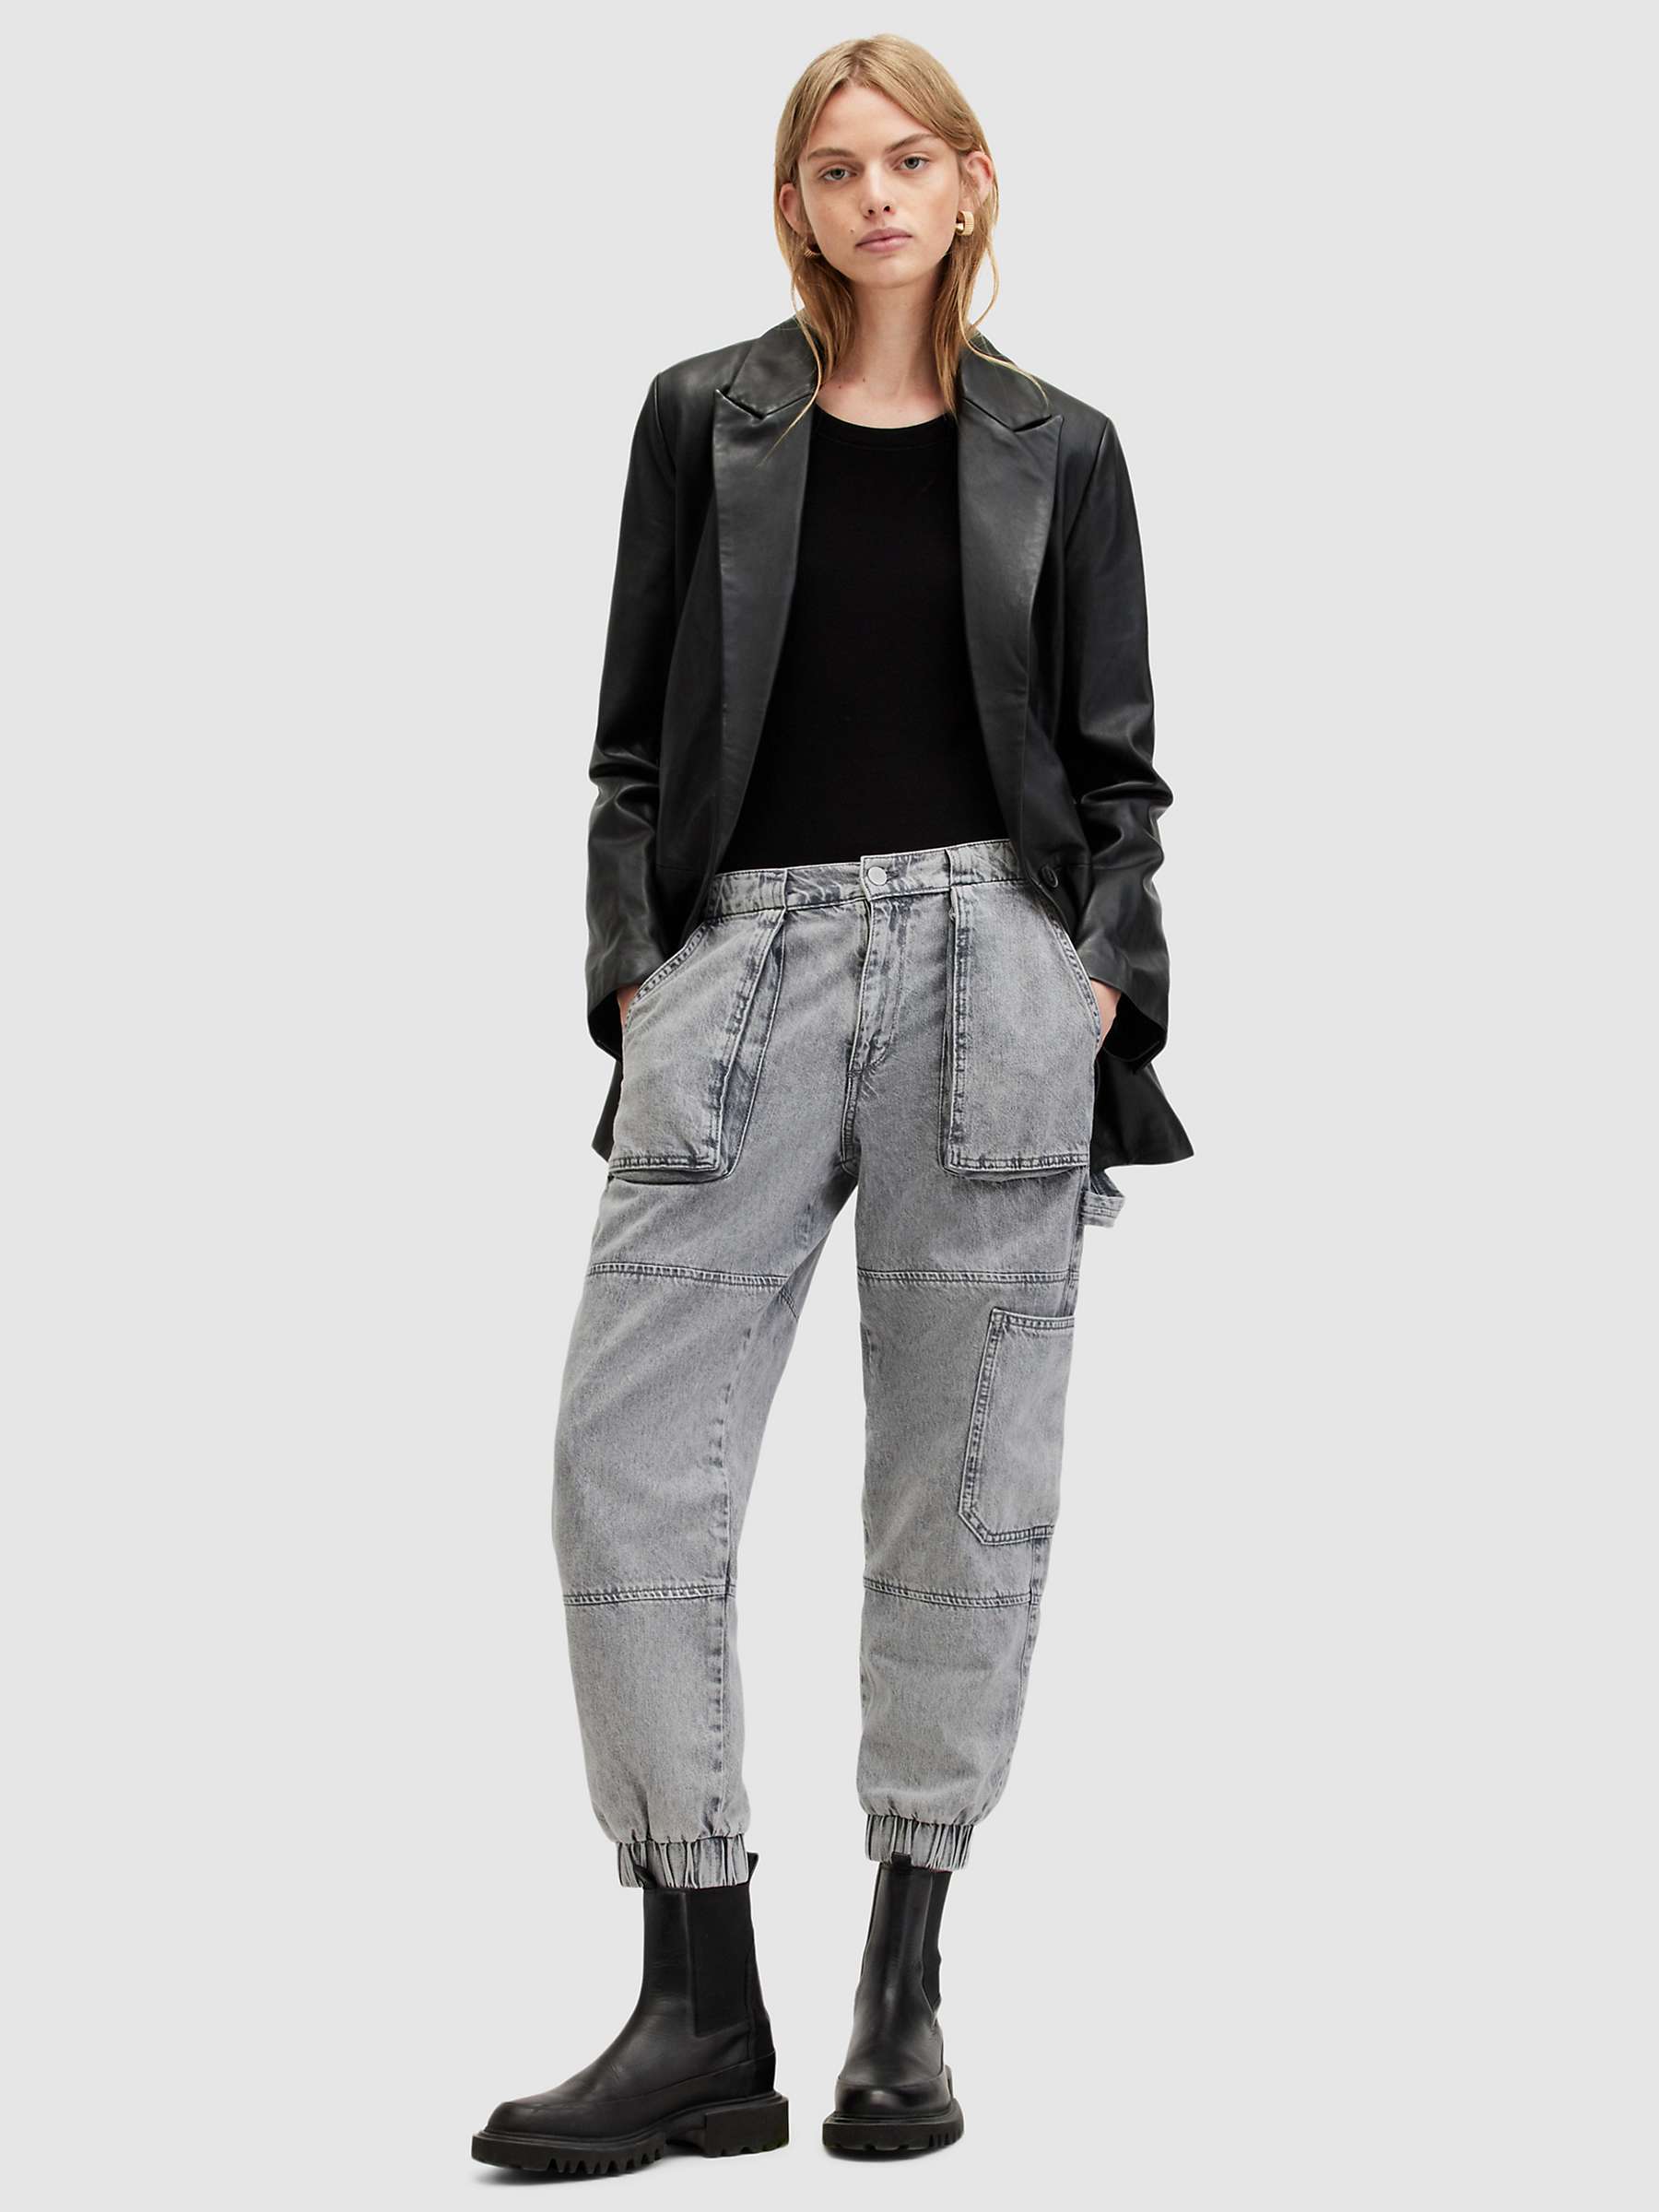 Buy AllSaints Mila High Rise Relaxed Cuffed Jeans, Washed Grey Online at johnlewis.com